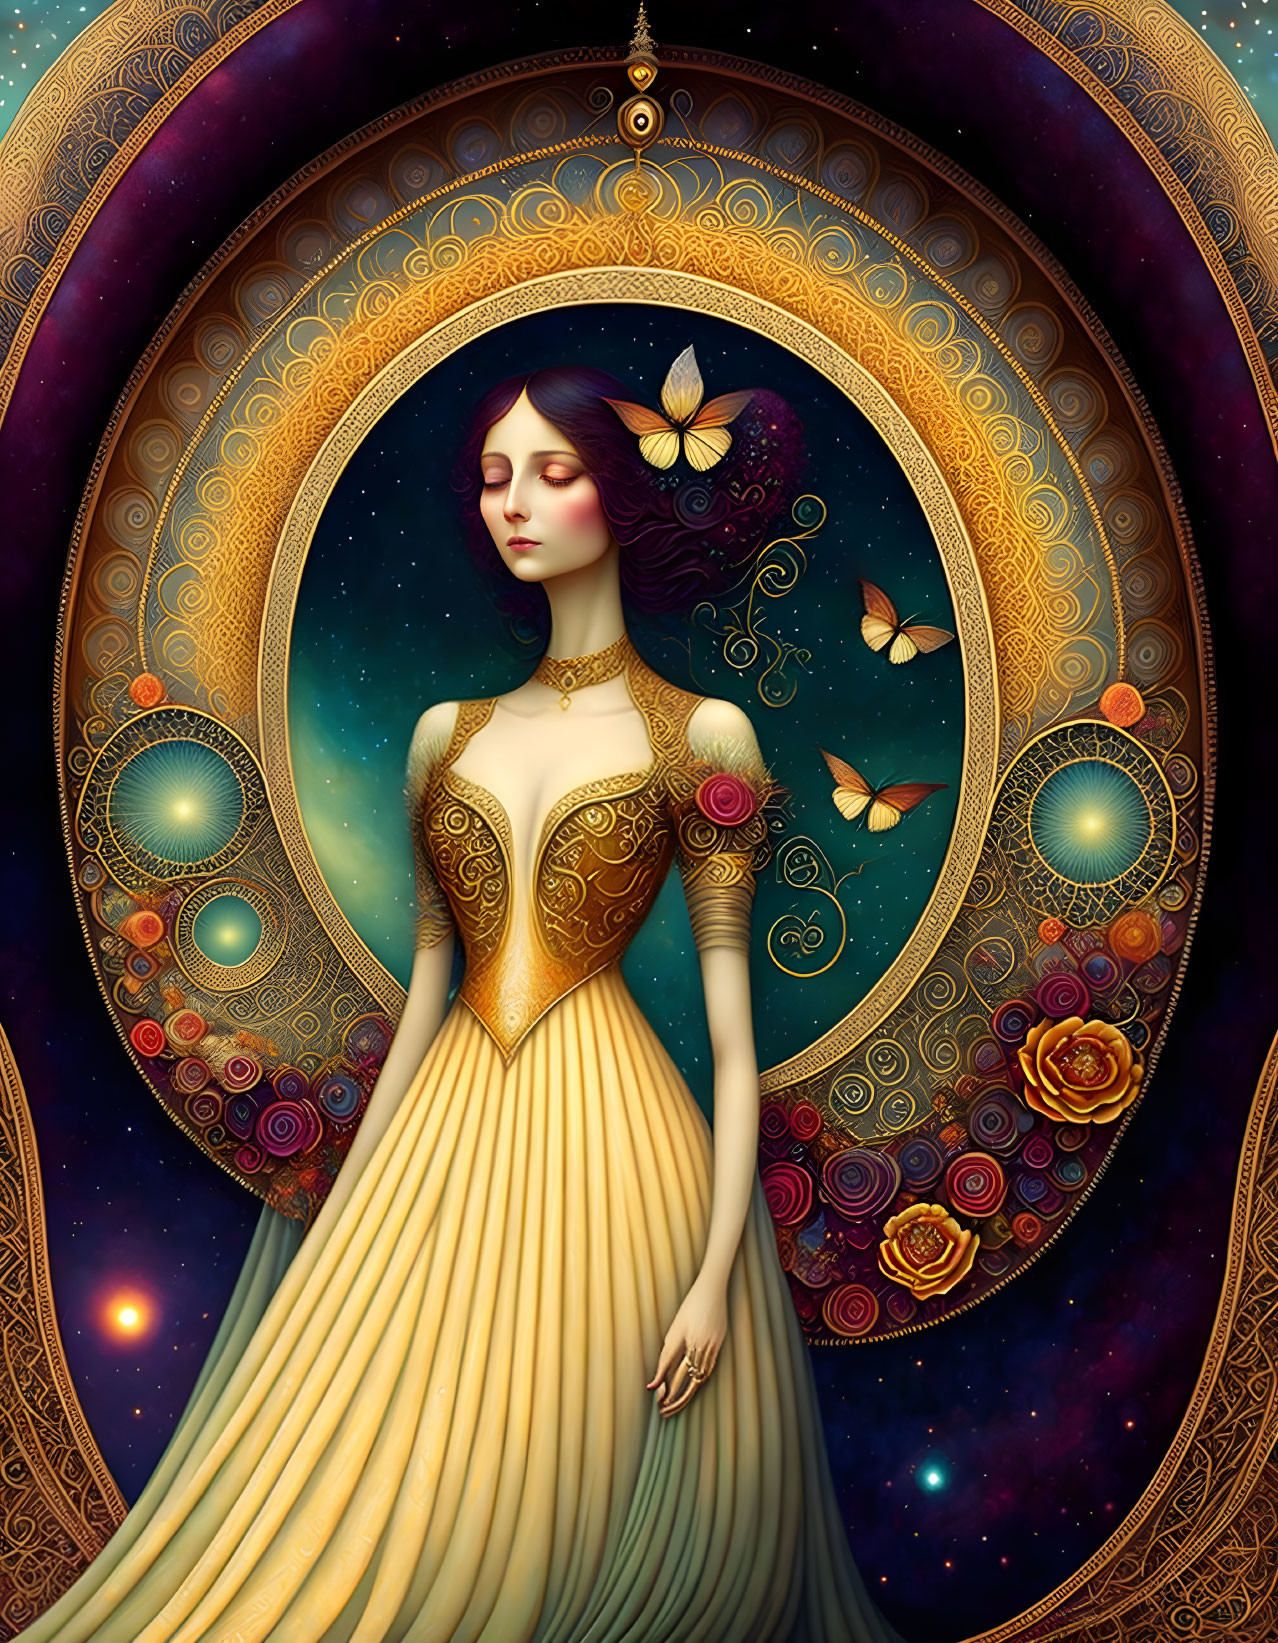 Ethereal woman in flowing gown surrounded by celestial circle and nature elements